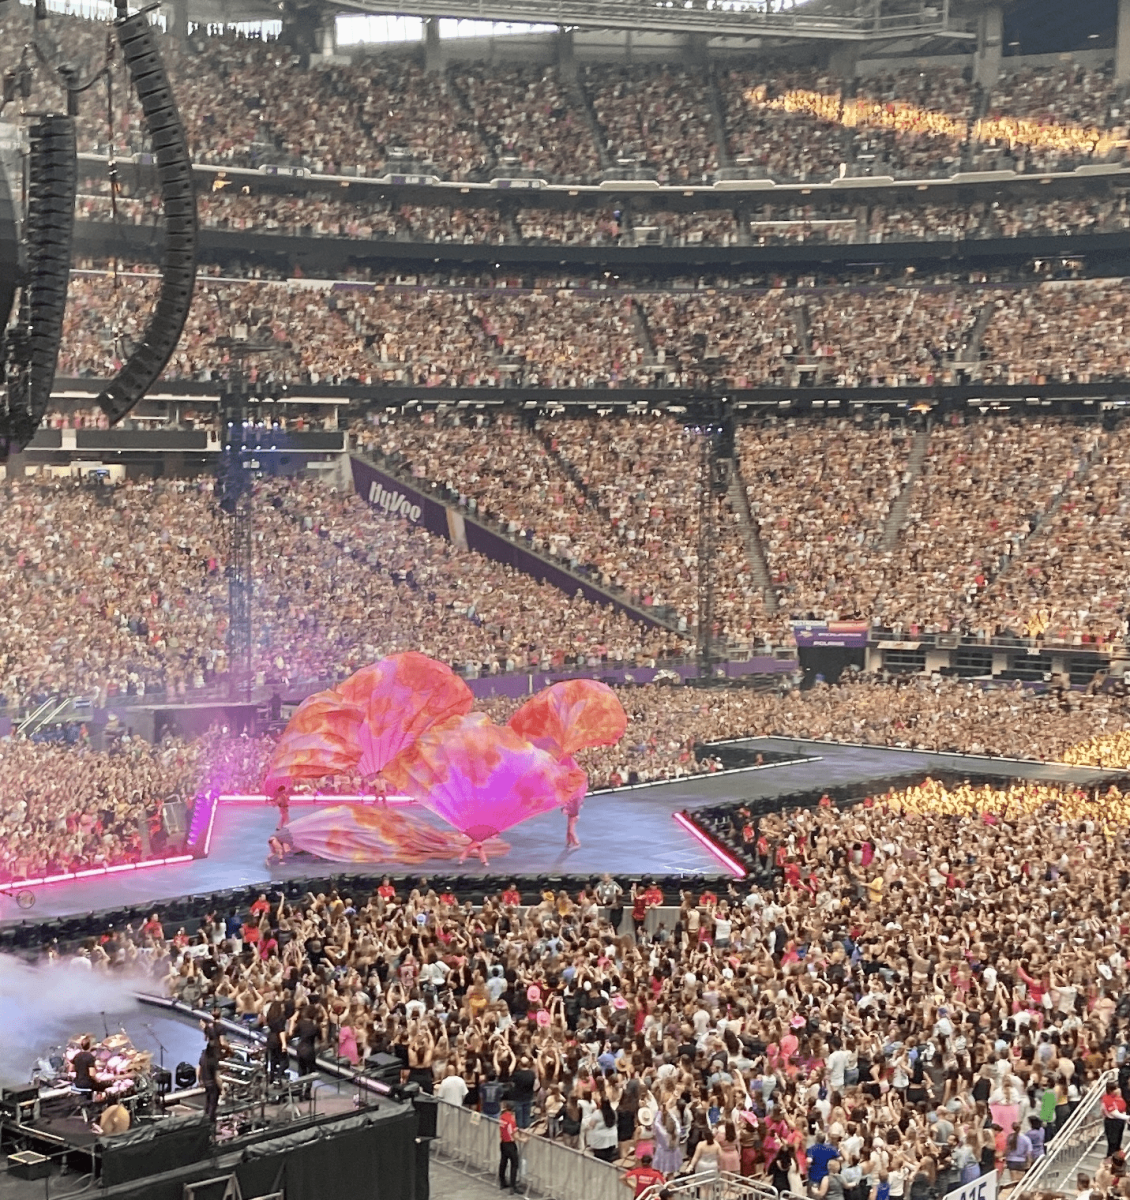 Taylor+Swift+takes+the+stage+at+the+Raymond+James+Stadium+in+Tampa+while+embarking+on+the+%E2%80%9CEras+Tour.%E2%80%9D+Thousands+of+locals+gathered+to+watch+the+pop+icon+sing+and+perform+her+historic+set+of+songs.